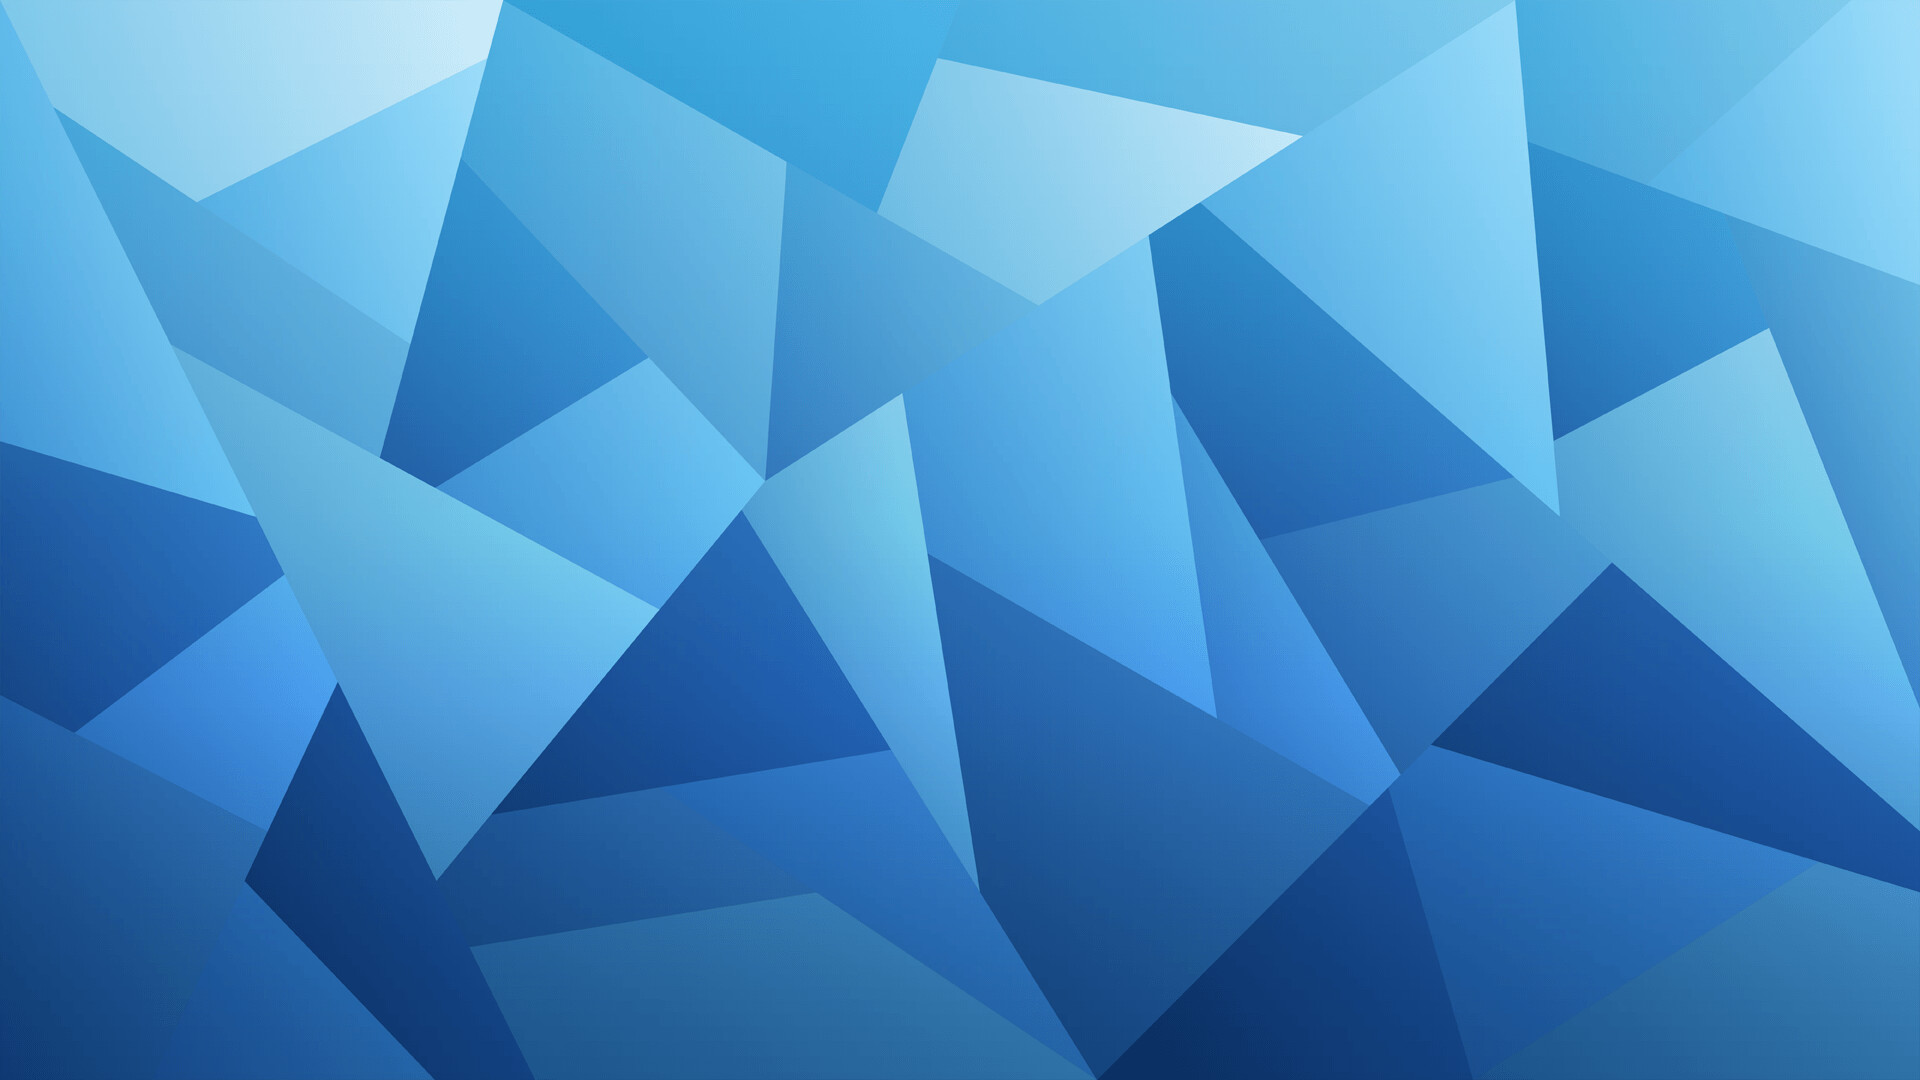 Geometric Abstract: Blue figures, Scalene triangles, Pentagons. 1920x1080 Full HD Background.